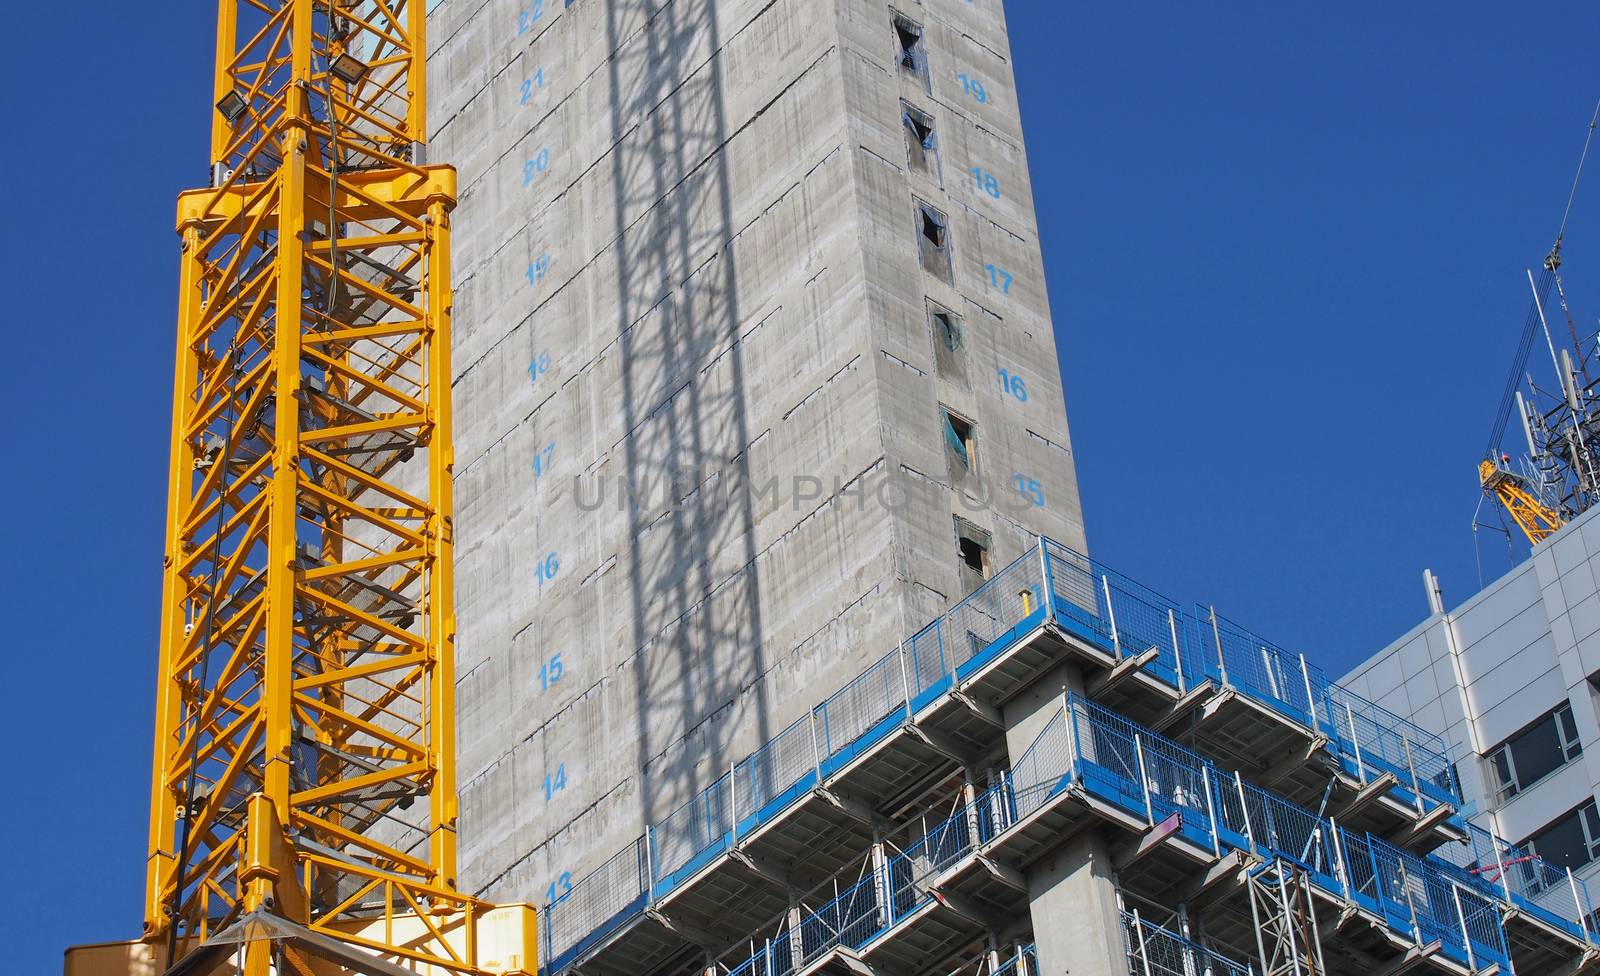 close up of a large urban construction site with a yellow tower crane casting a shadow on a large concrete building and safety fences against a blue sky